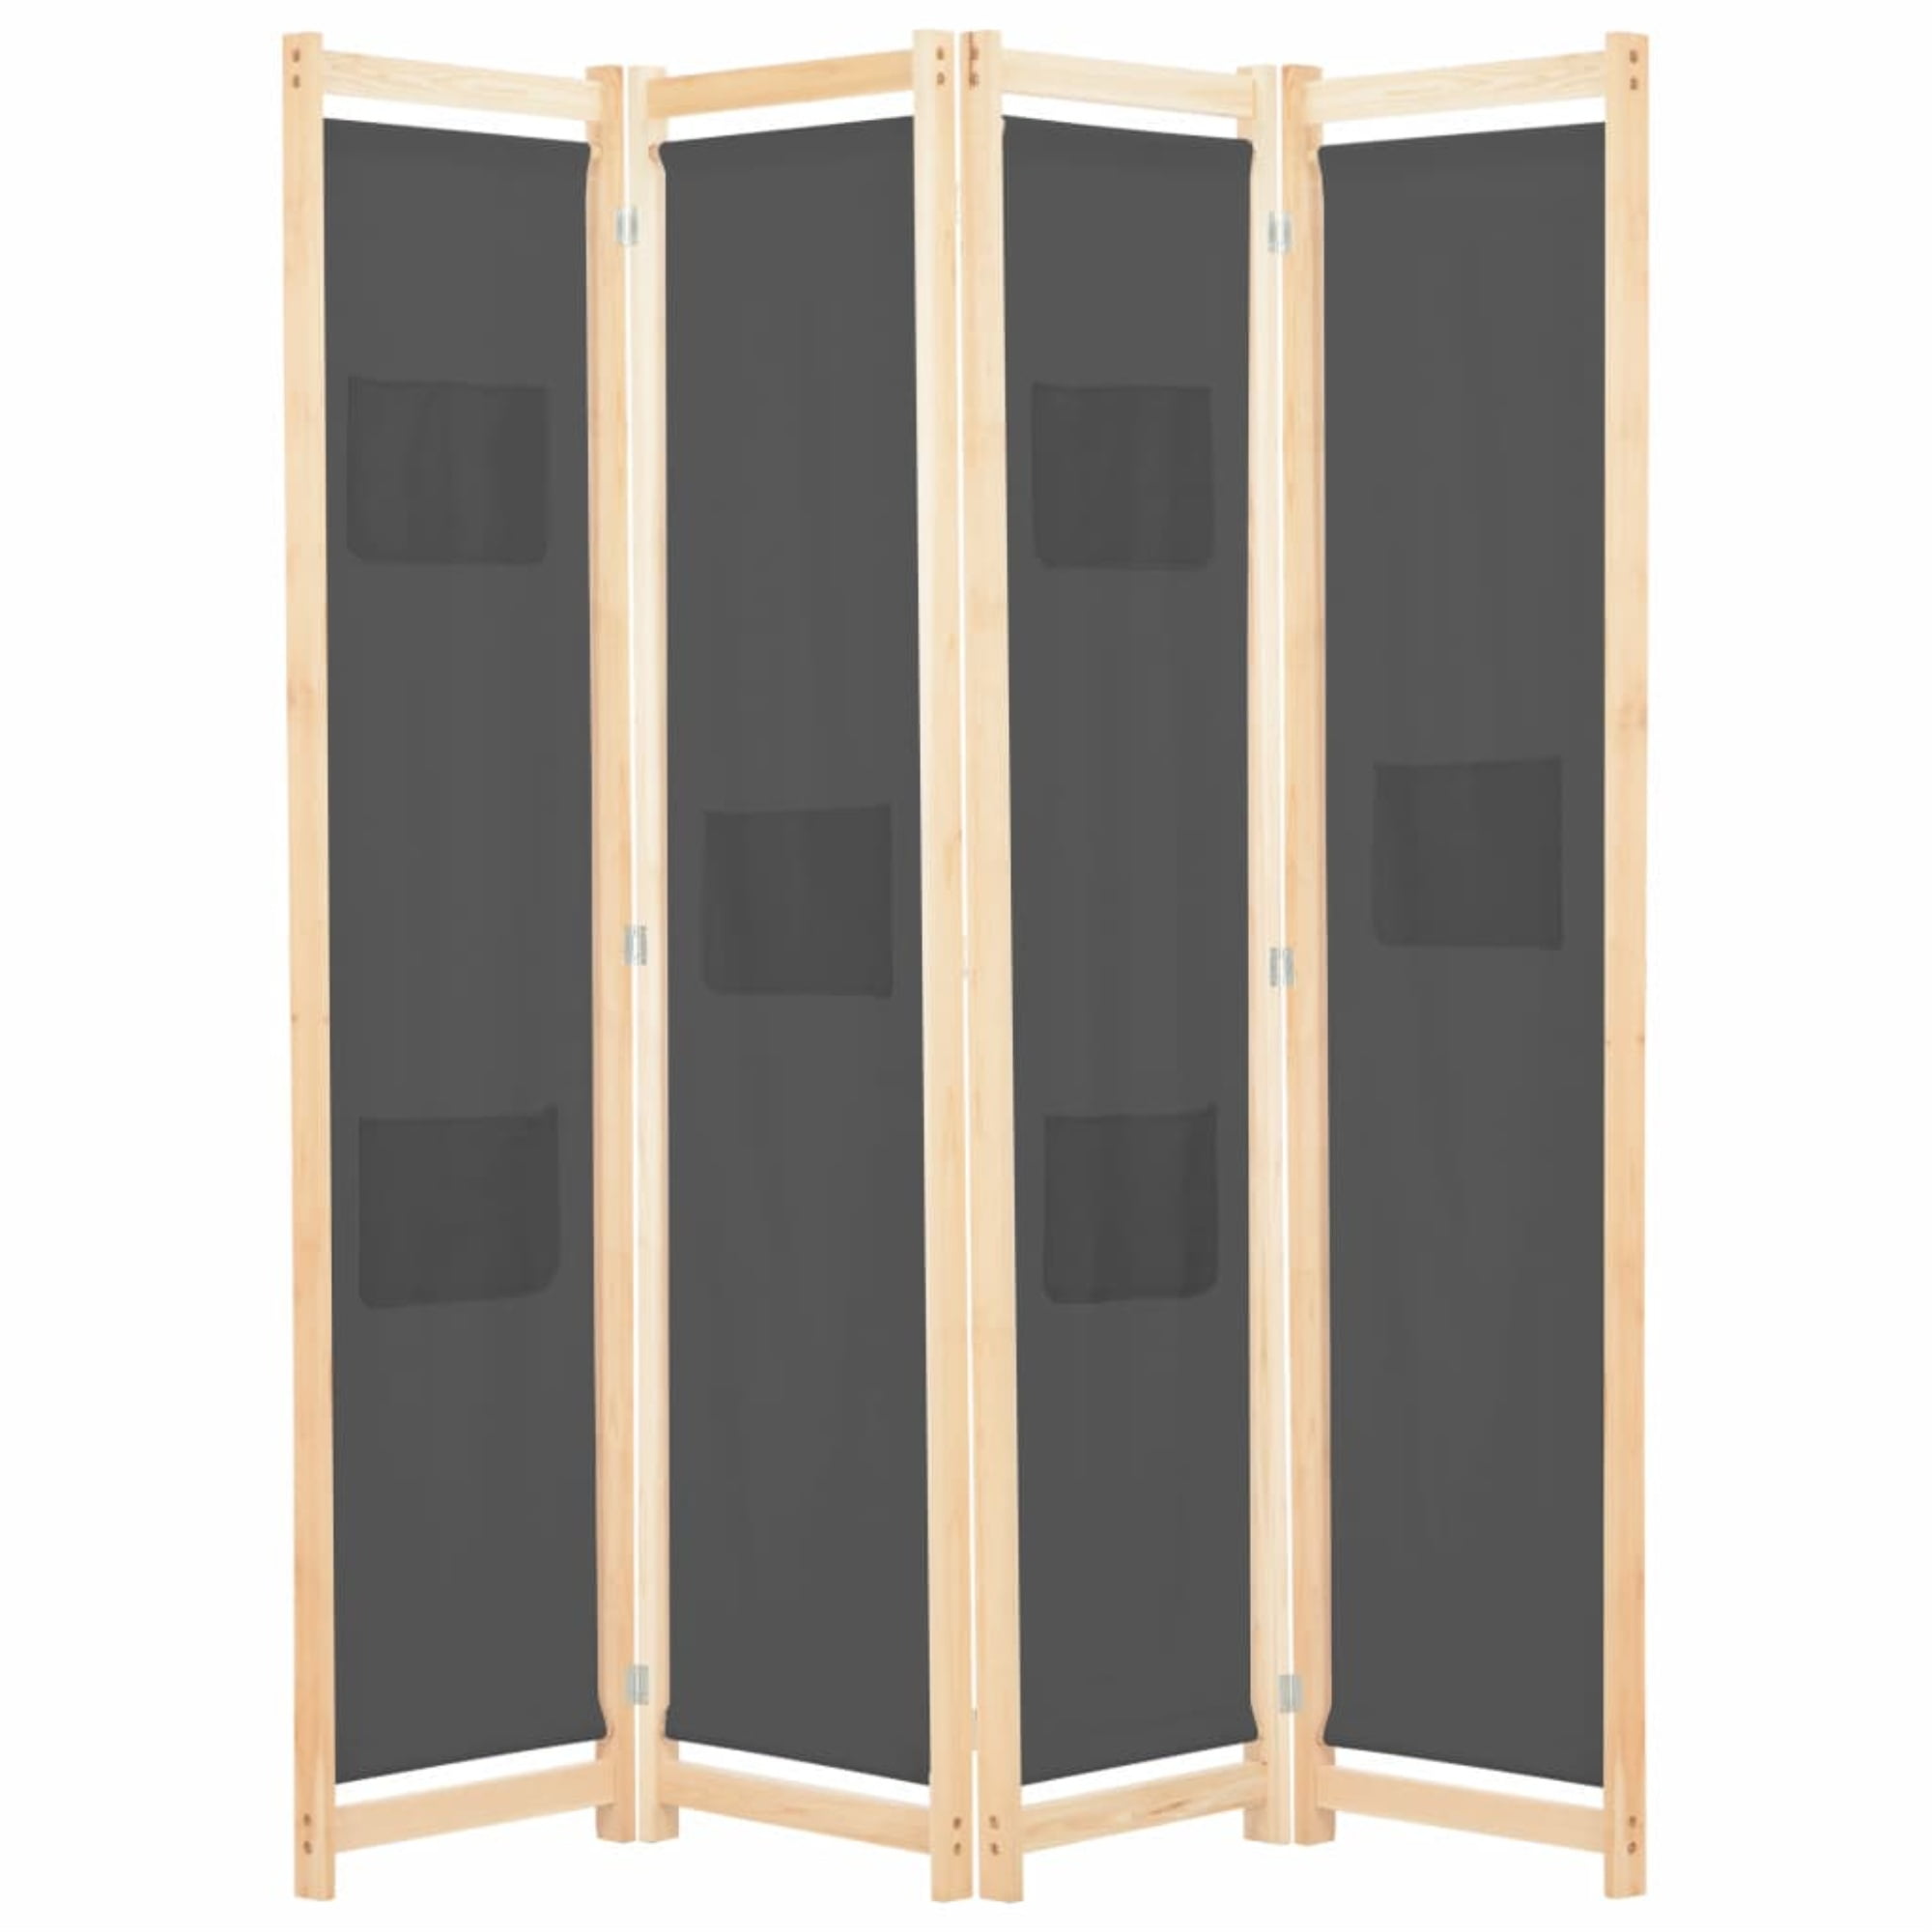 Details about   Room Divider Bamboo Privacy Screen Folding Screen Freestanding Office Dividers 